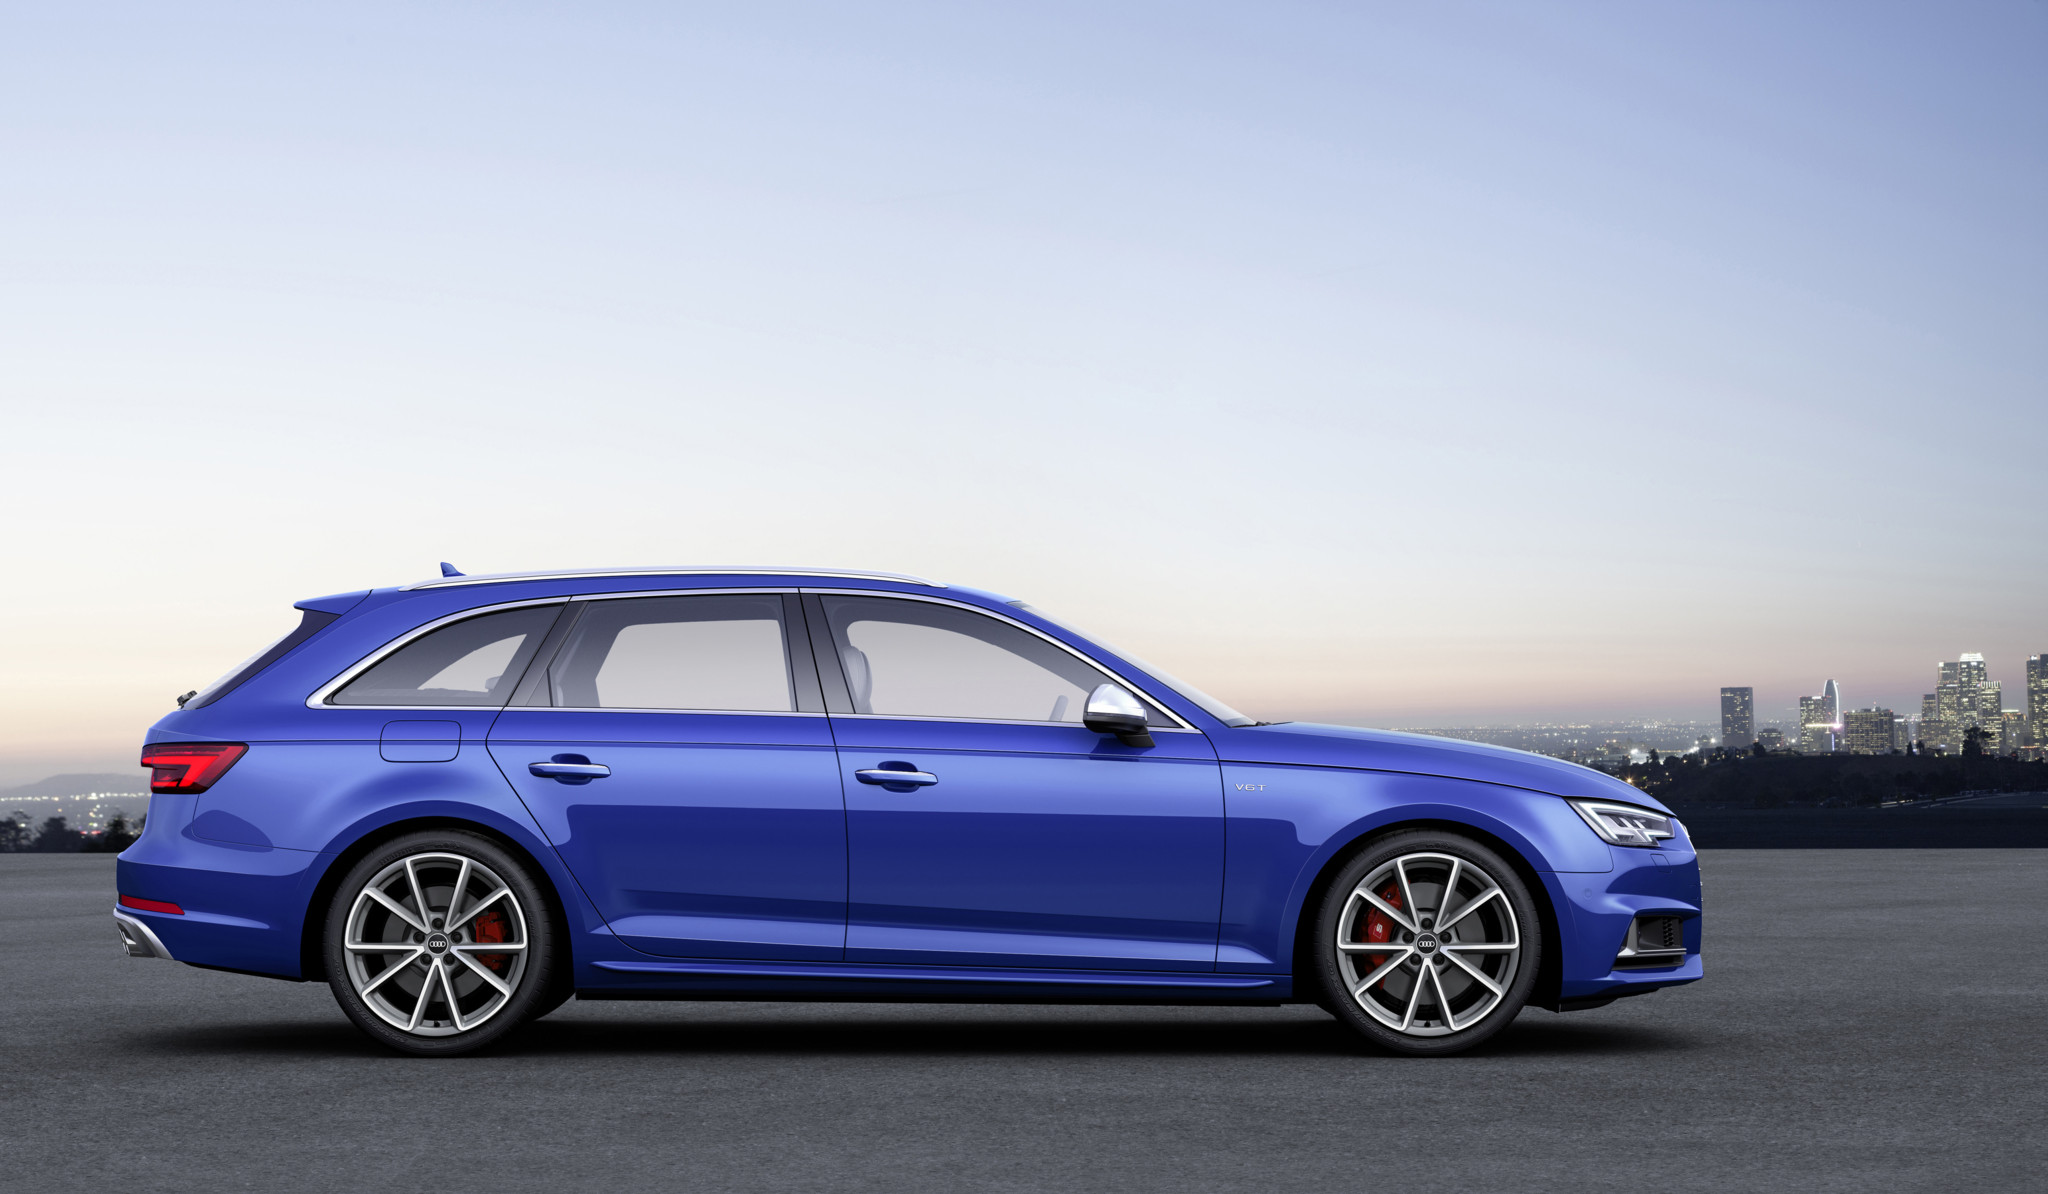 A Masterpiece Of German Engineering: The 2016 Audi S4